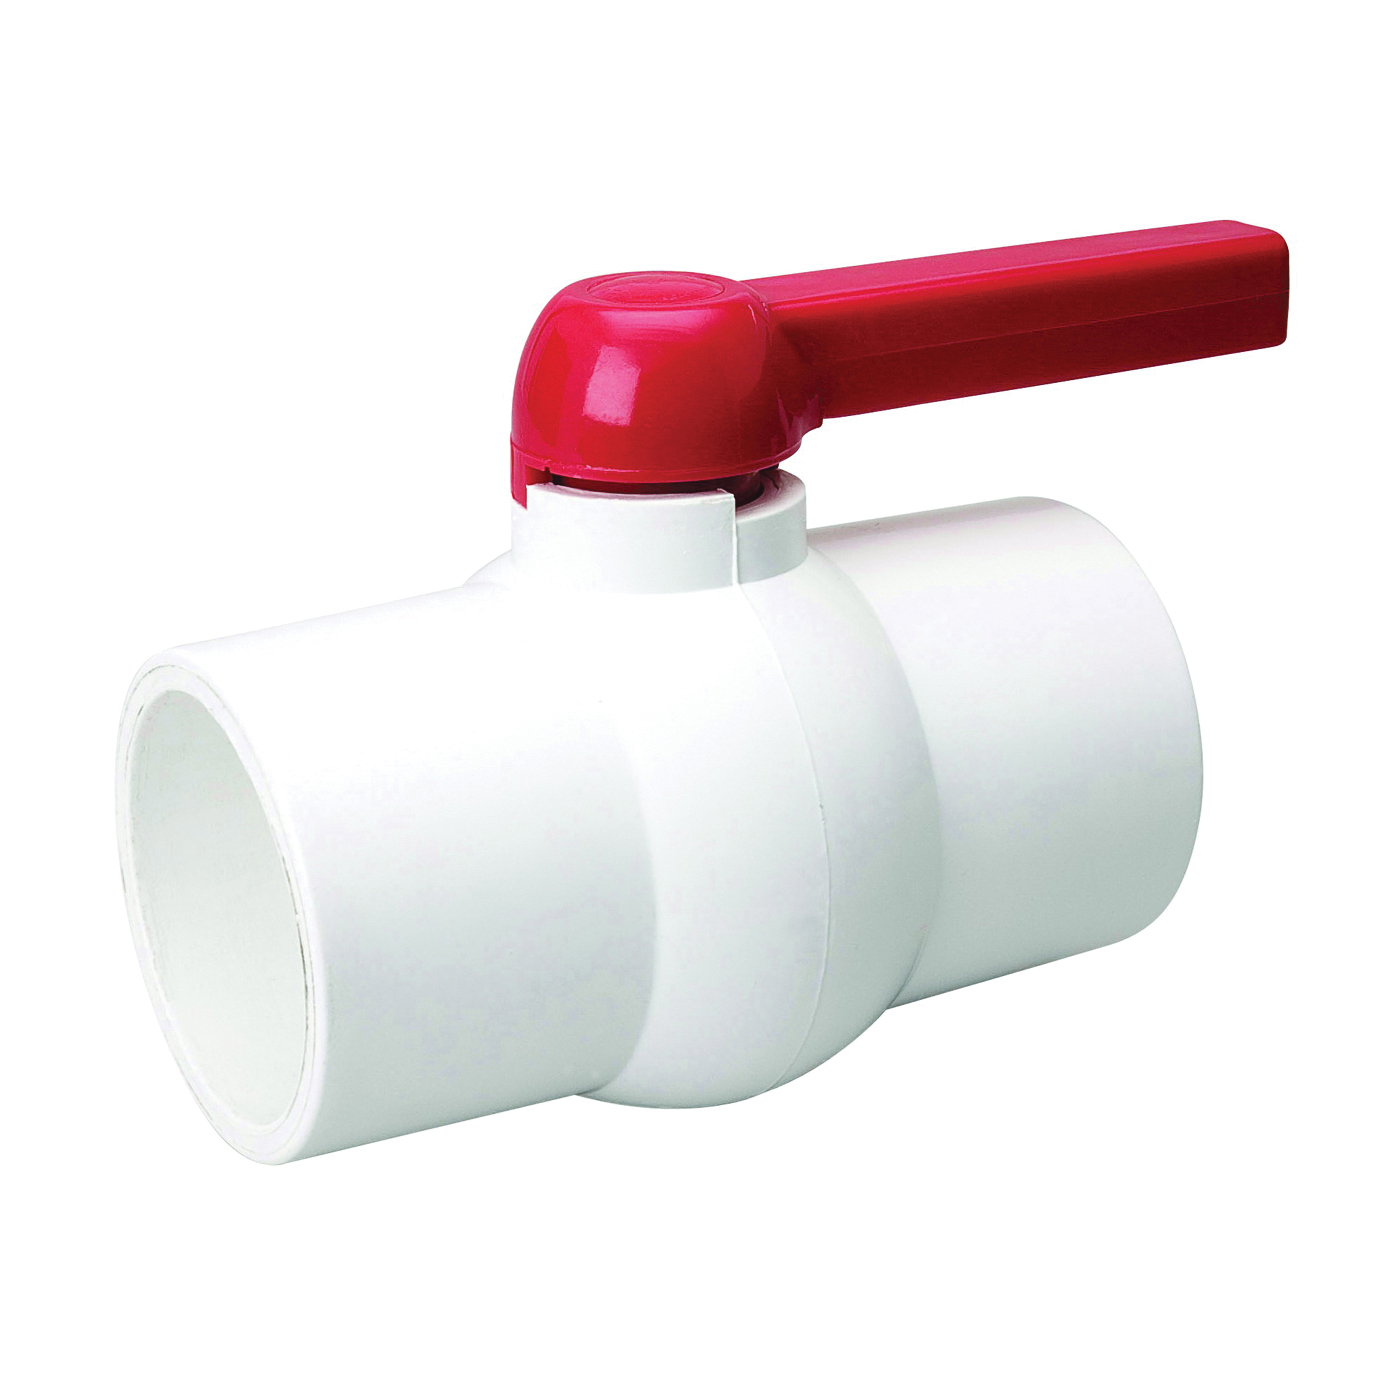 107-640 Ball Valve, 3 in Connection, Compression, 150 psi Pressure, Manual Actuator, PVC Body